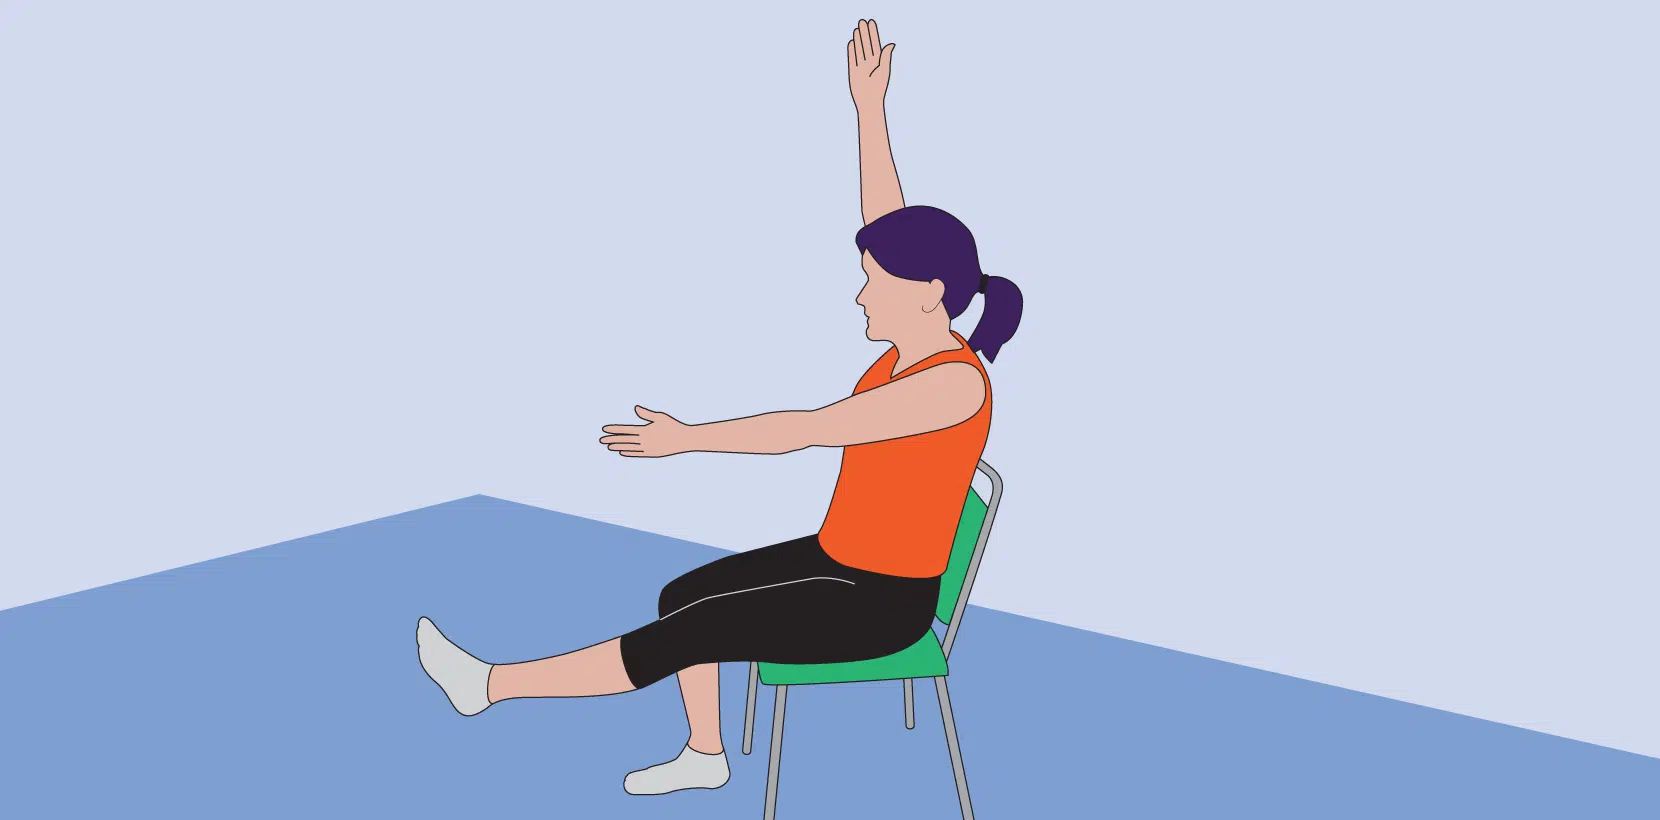 Exercises for a 70-Year-Old Woman